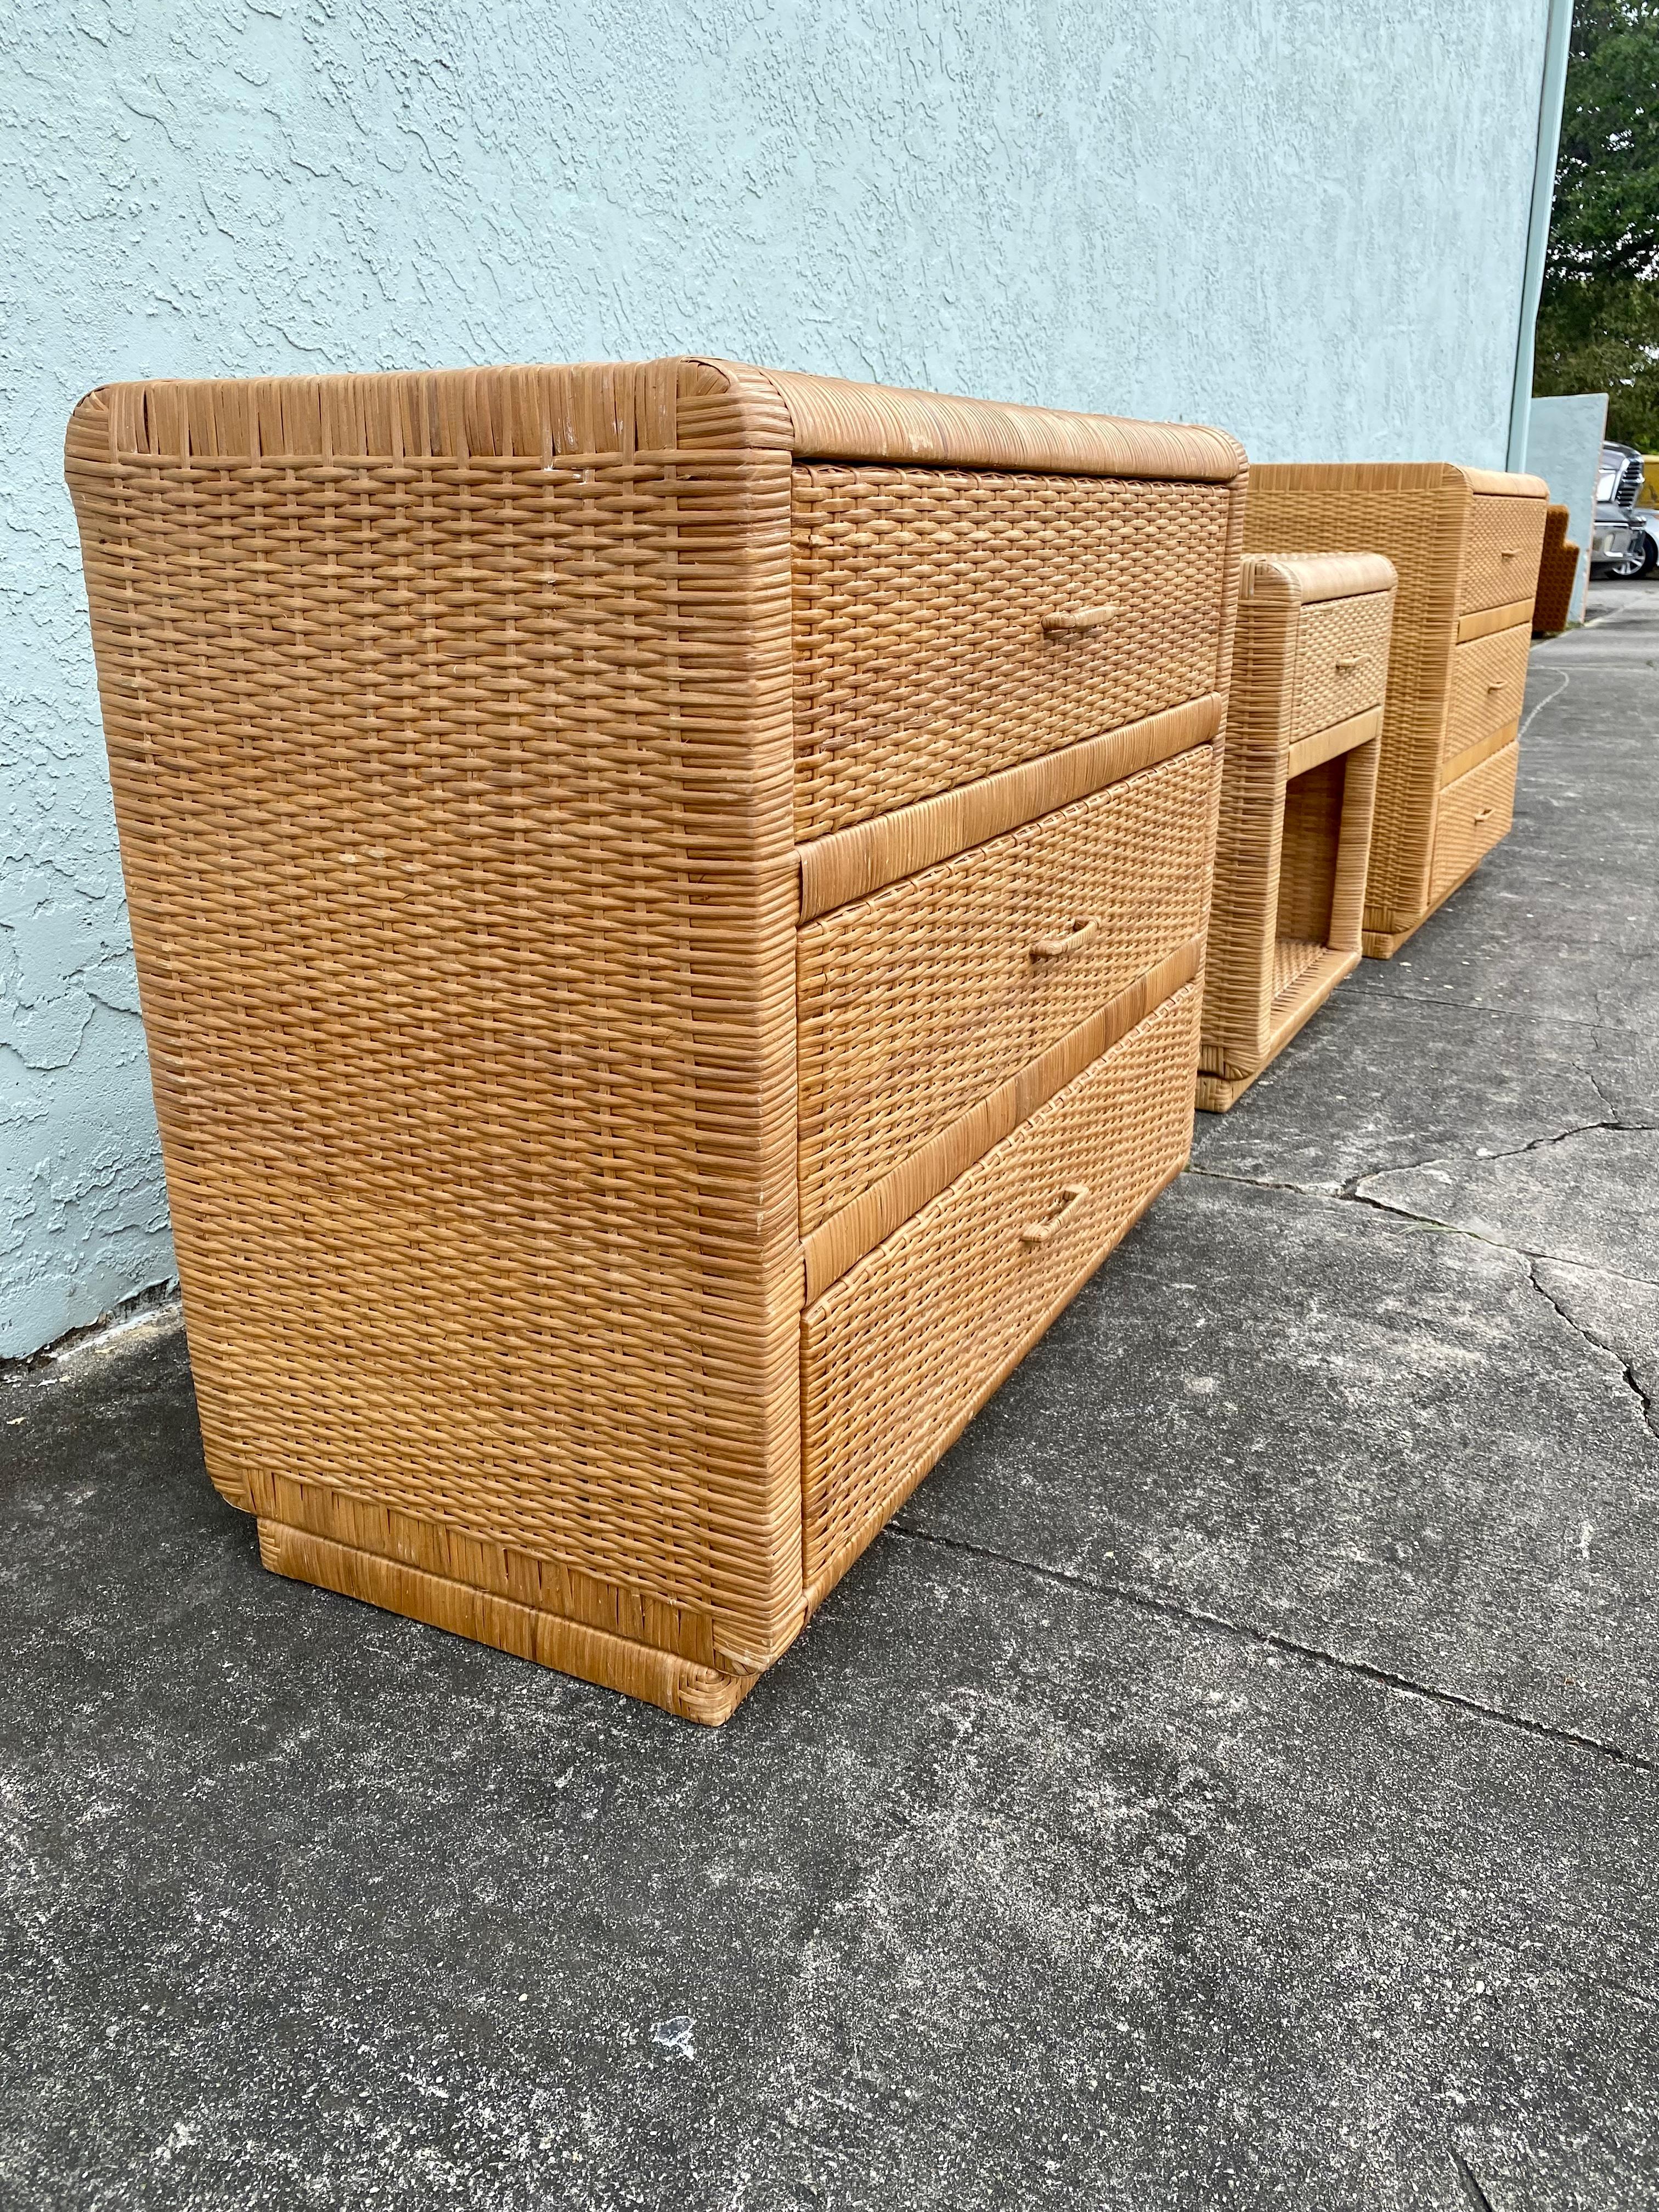 On offer on this occasion is one of the most stunning,  rattan chest of drawers and nightstand set you could hope to find. Outstanding design is exhibited throughout. The beautiful set is statement piece and packed with personality!  Just look at